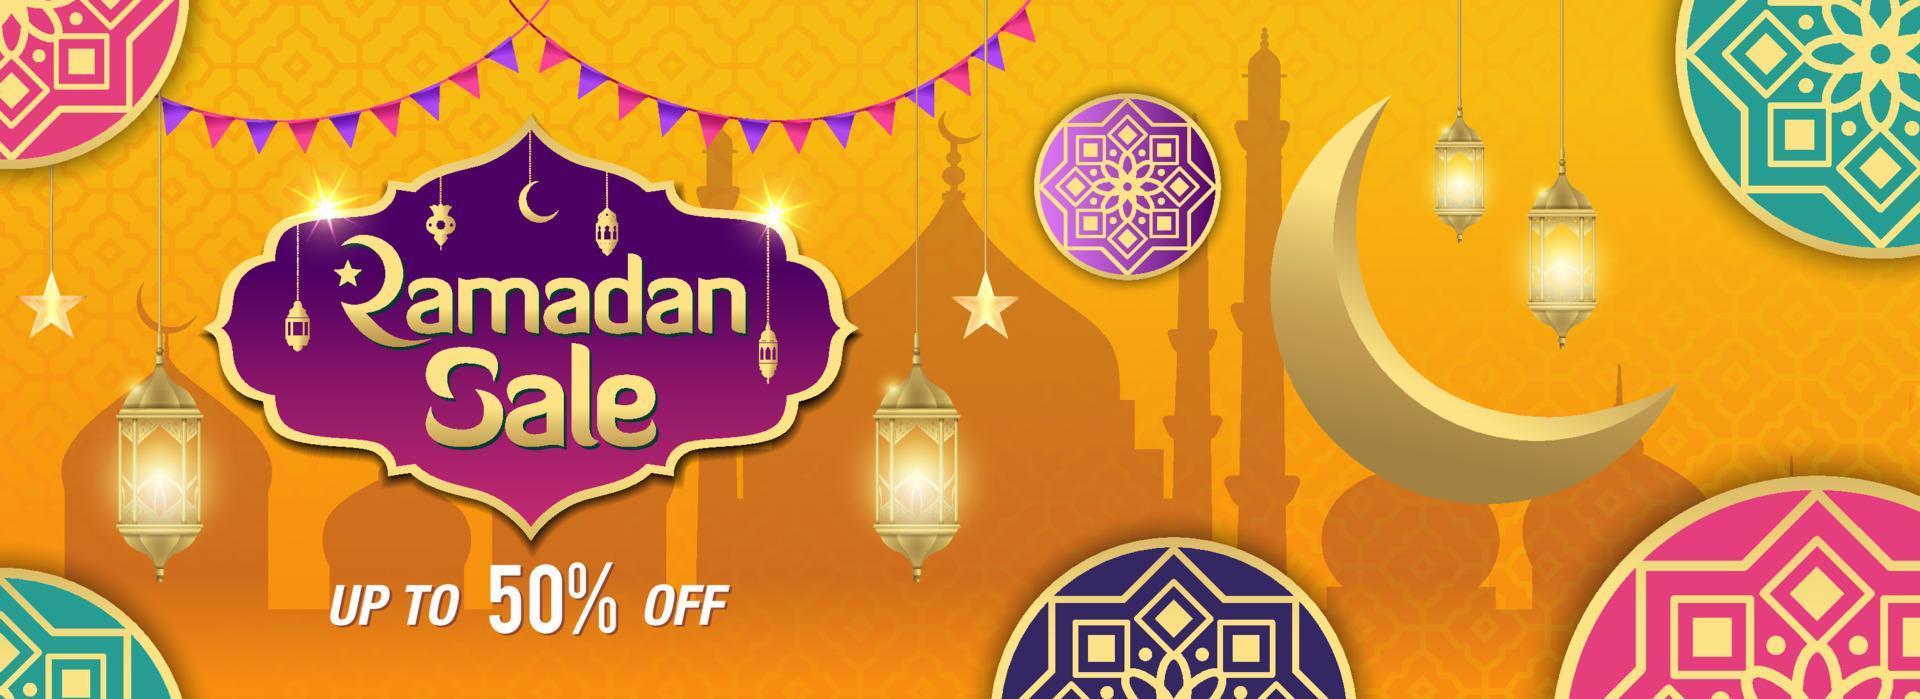 Ramadan Sale, web header or banner design with golden shiny frame, arabic lanterns and golden crescent moon on yellow background vector